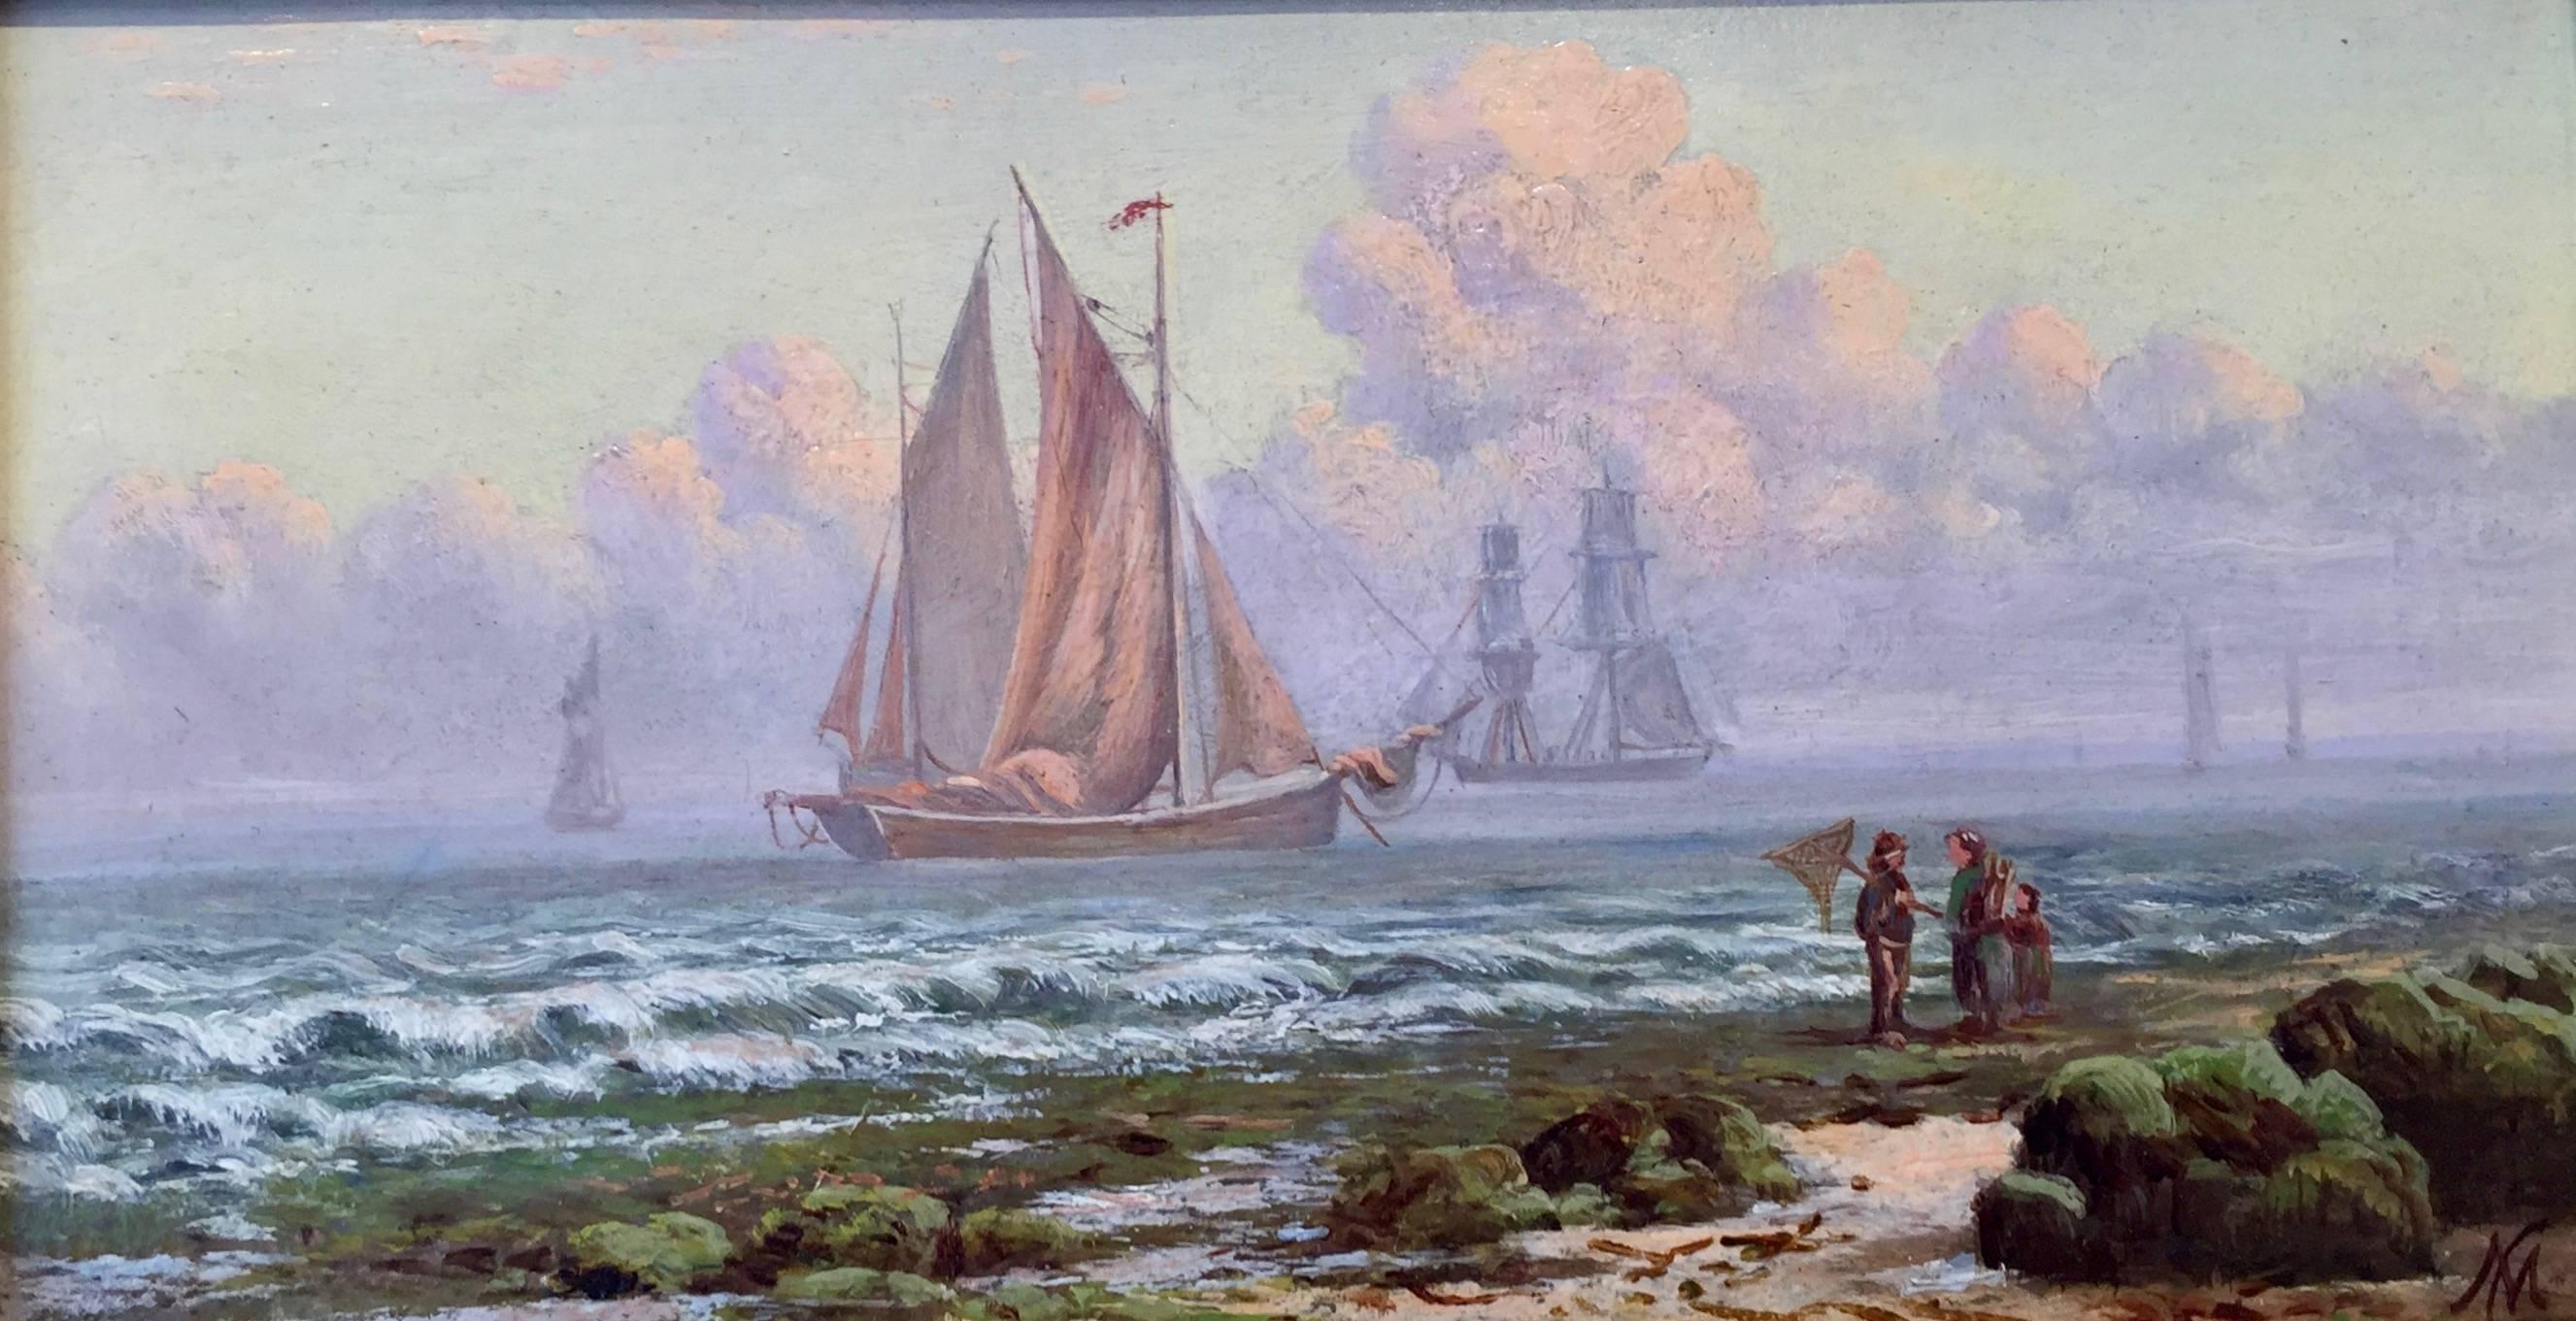 19th century English ship by the shore in the late afternoon Sun - Painting by Michael Cambell